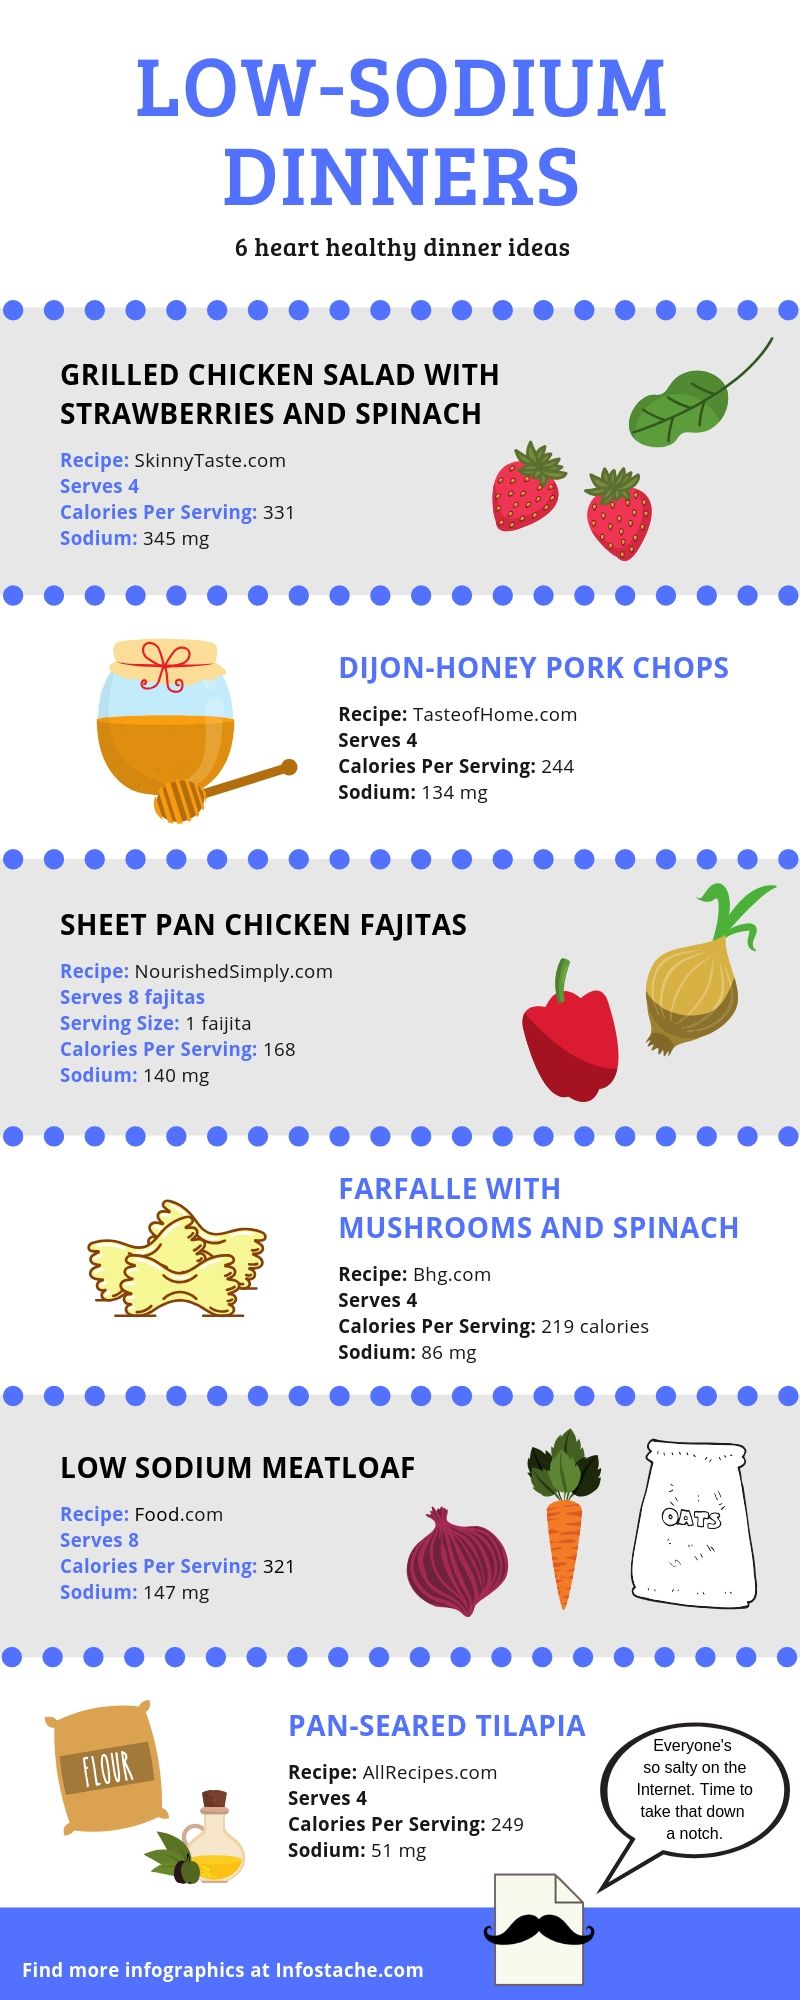 Low Sodium Dinners - Infographic